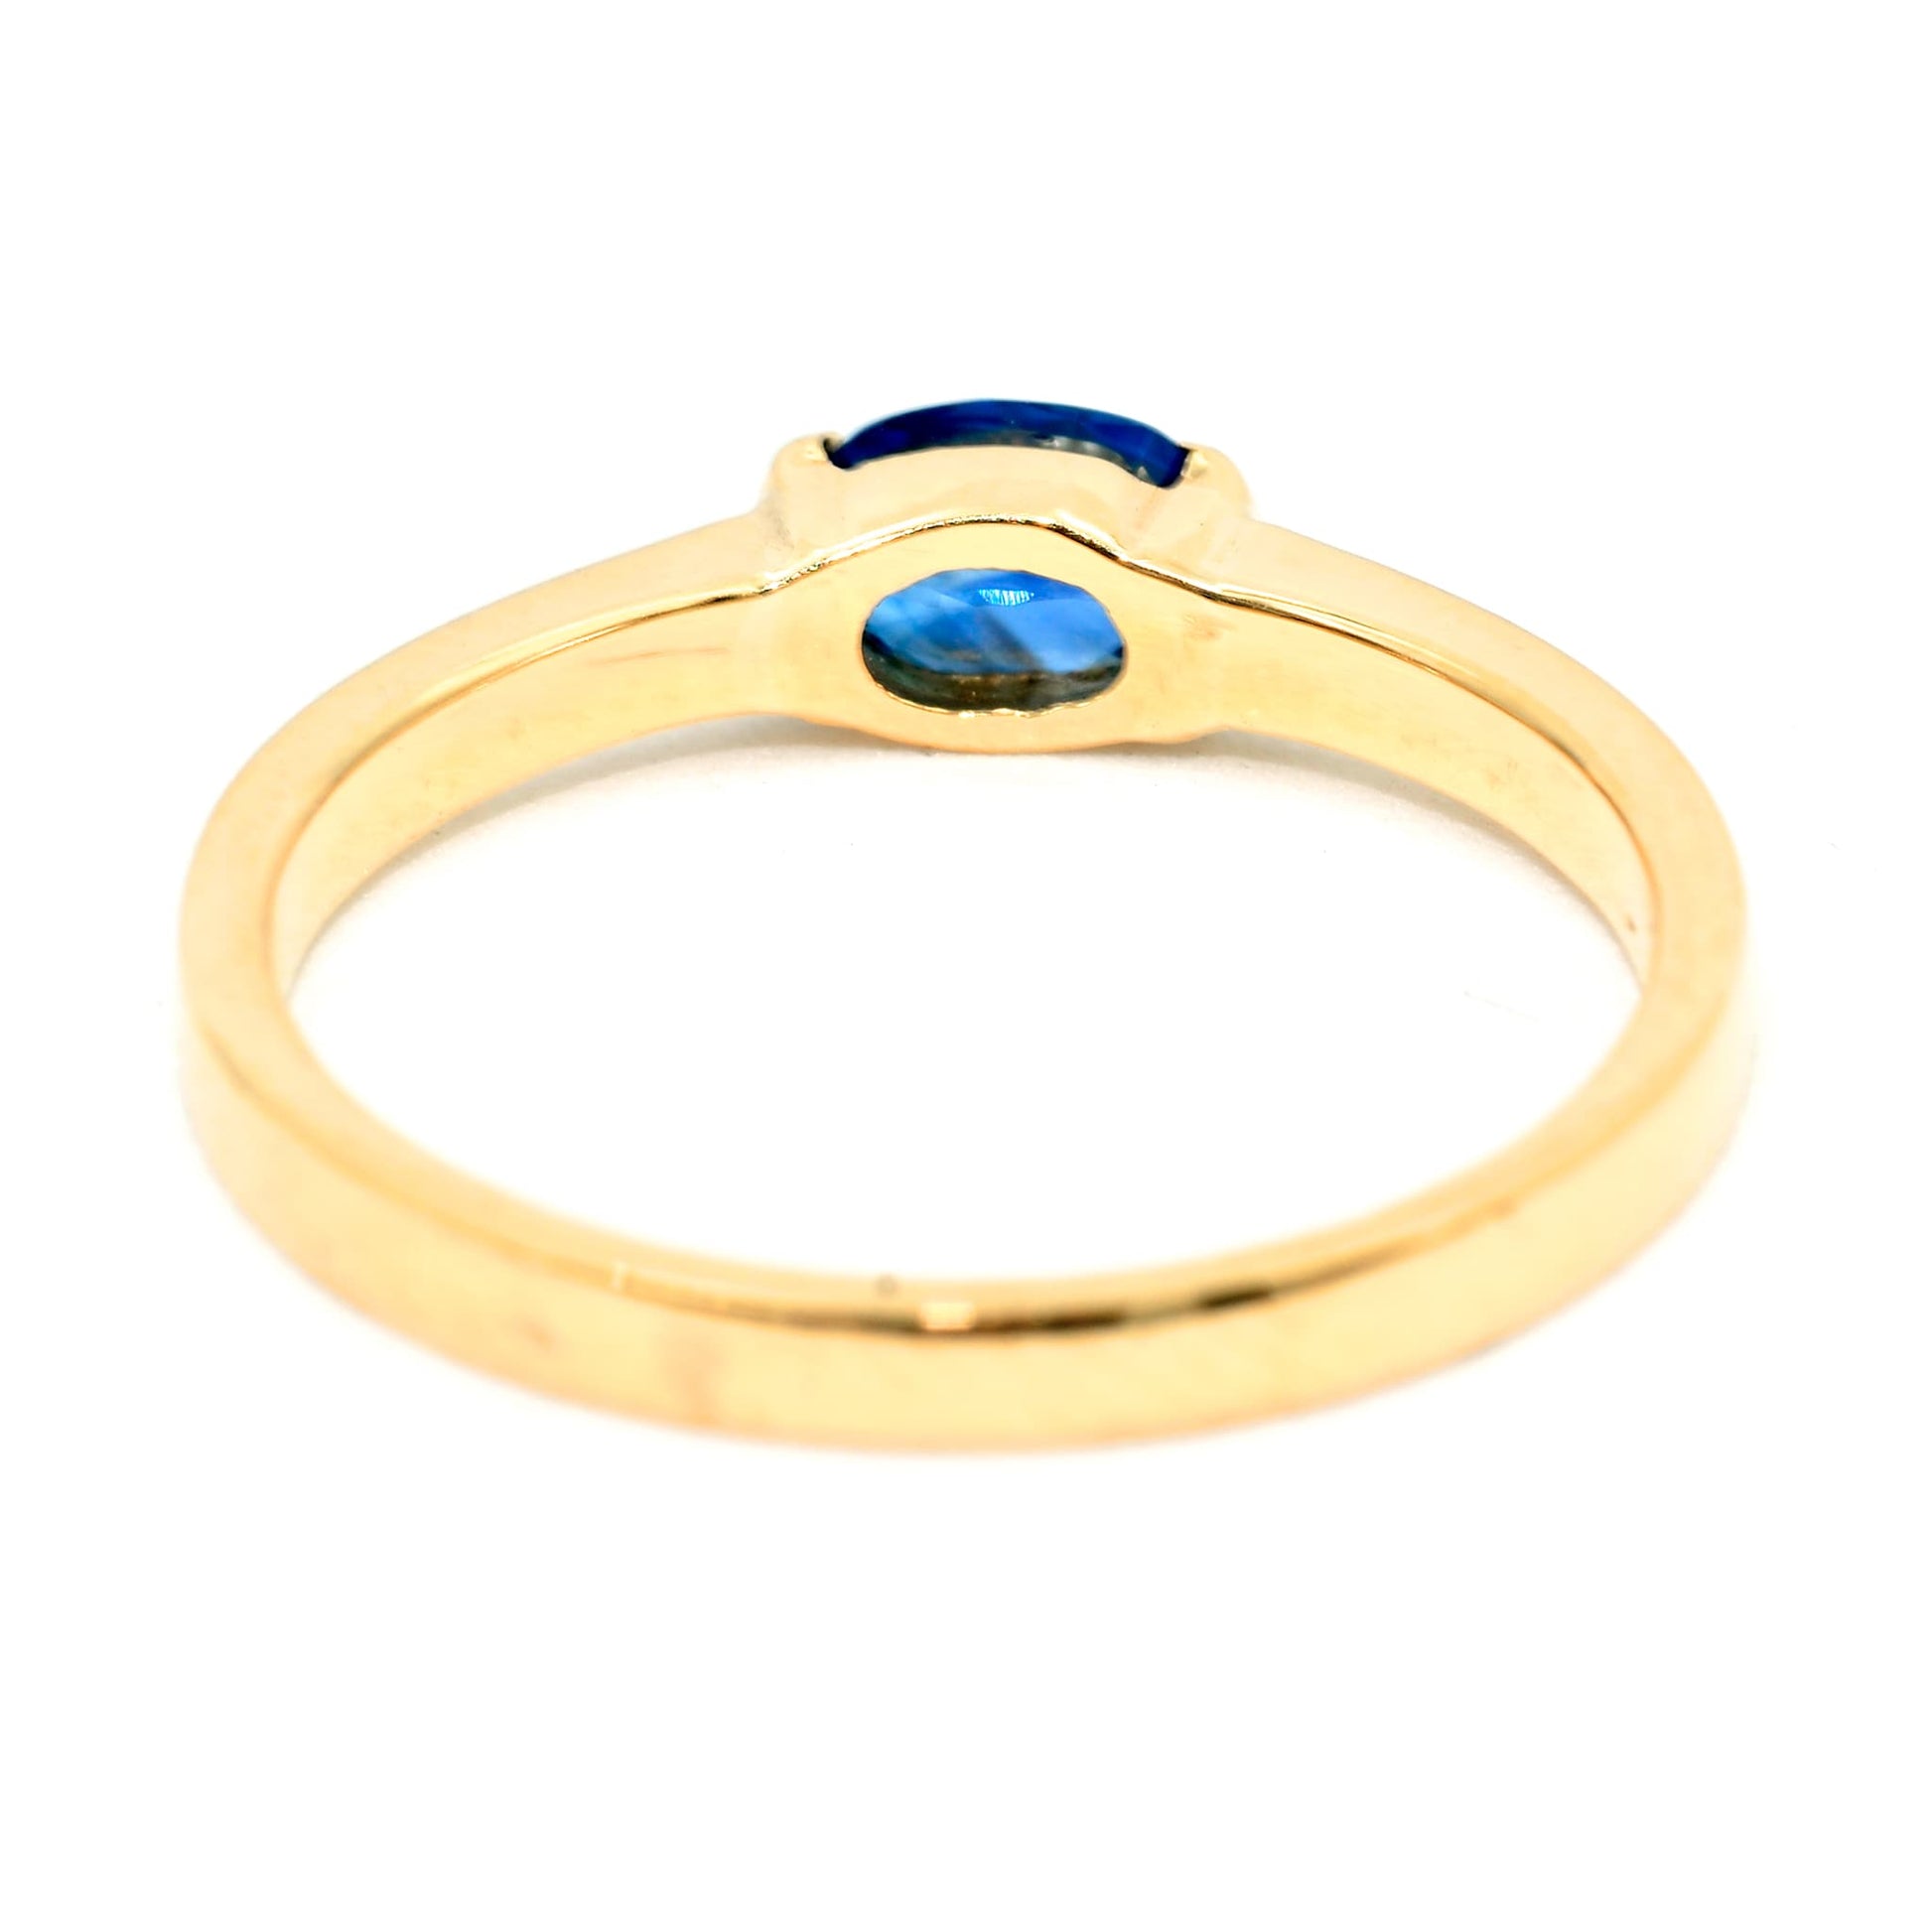 Blue sapphire ring with handmade band